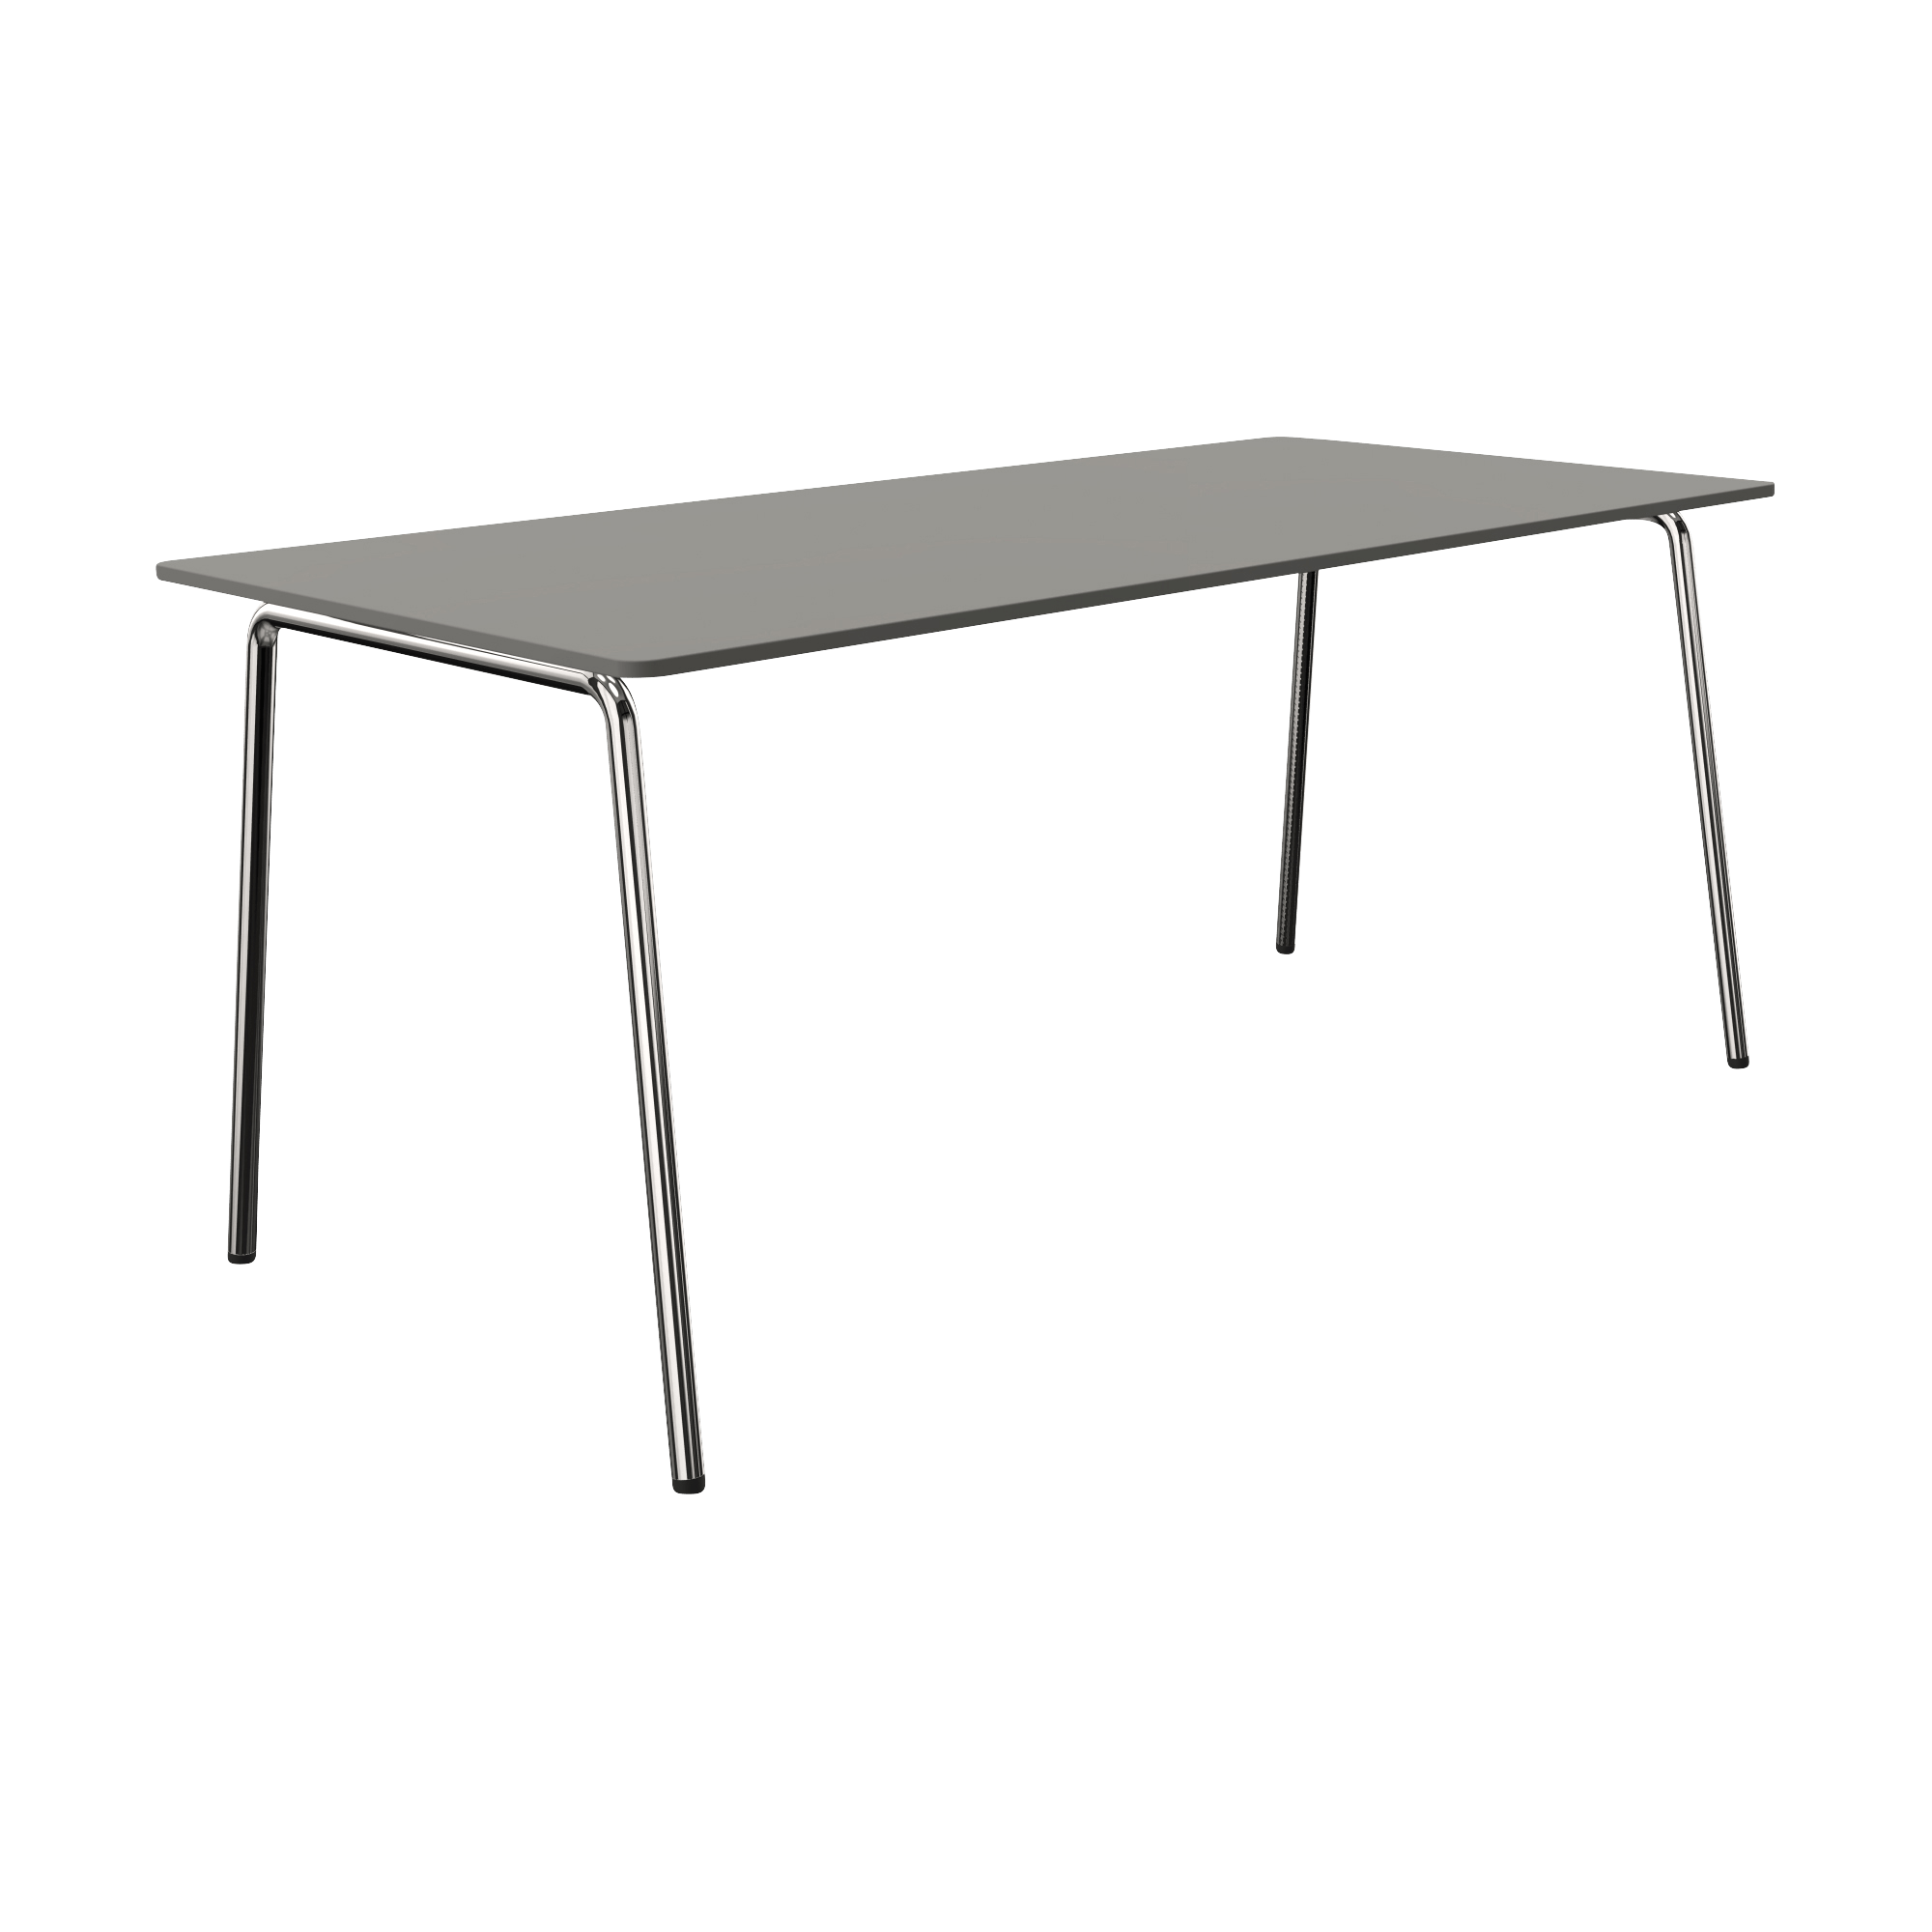 Grey, long, wide rectangular table with 4 chrome legs